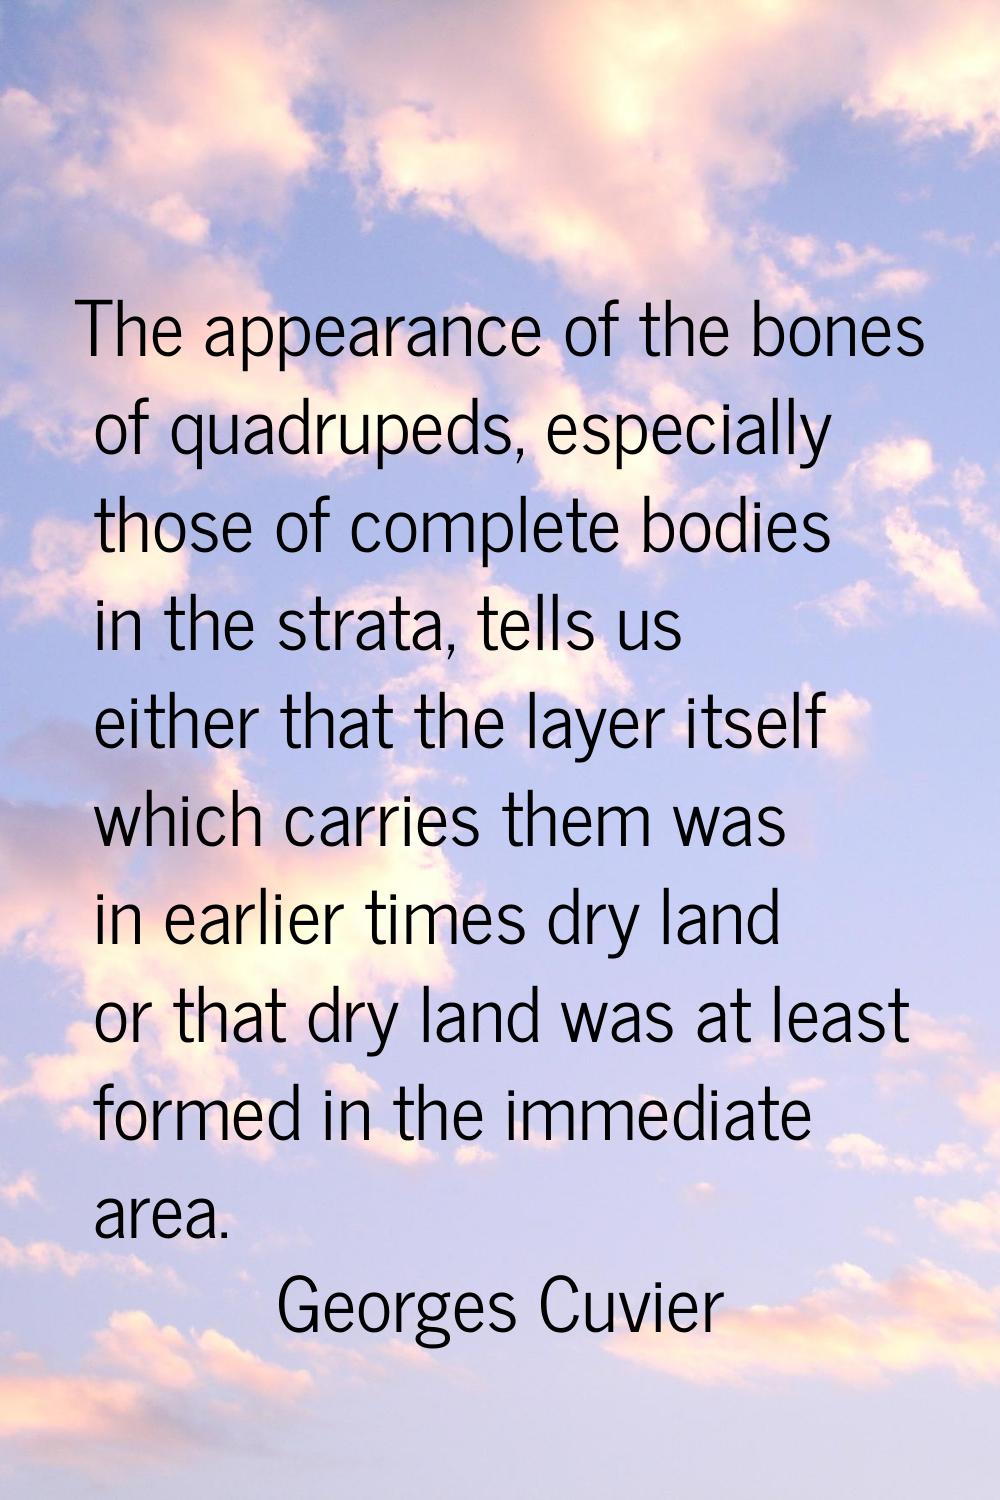 The appearance of the bones of quadrupeds, especially those of complete bodies in the strata, tells